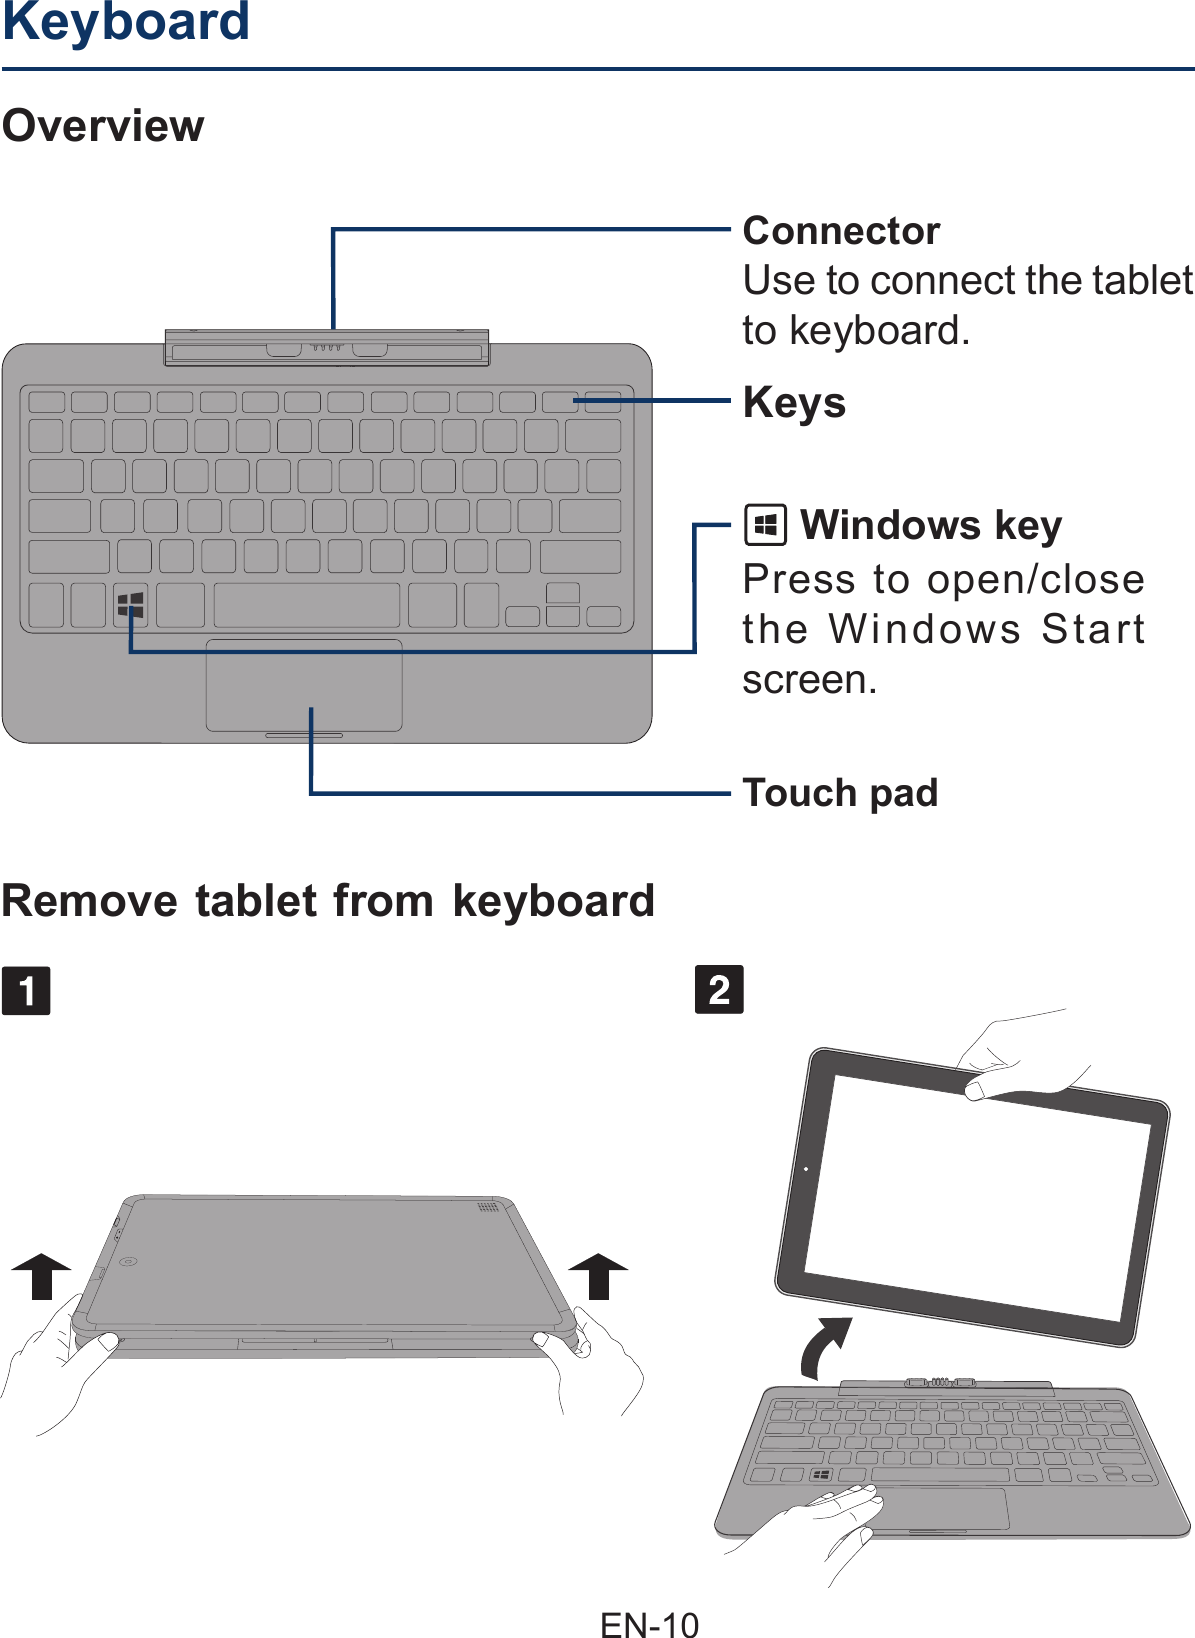                                                EN-10 OverviewConnectorUse to connect the tablet to keyboard.Touch padKeyboardKeysRemove tablet from keyboard Windows keyPress to open/close the Windows Start screen.